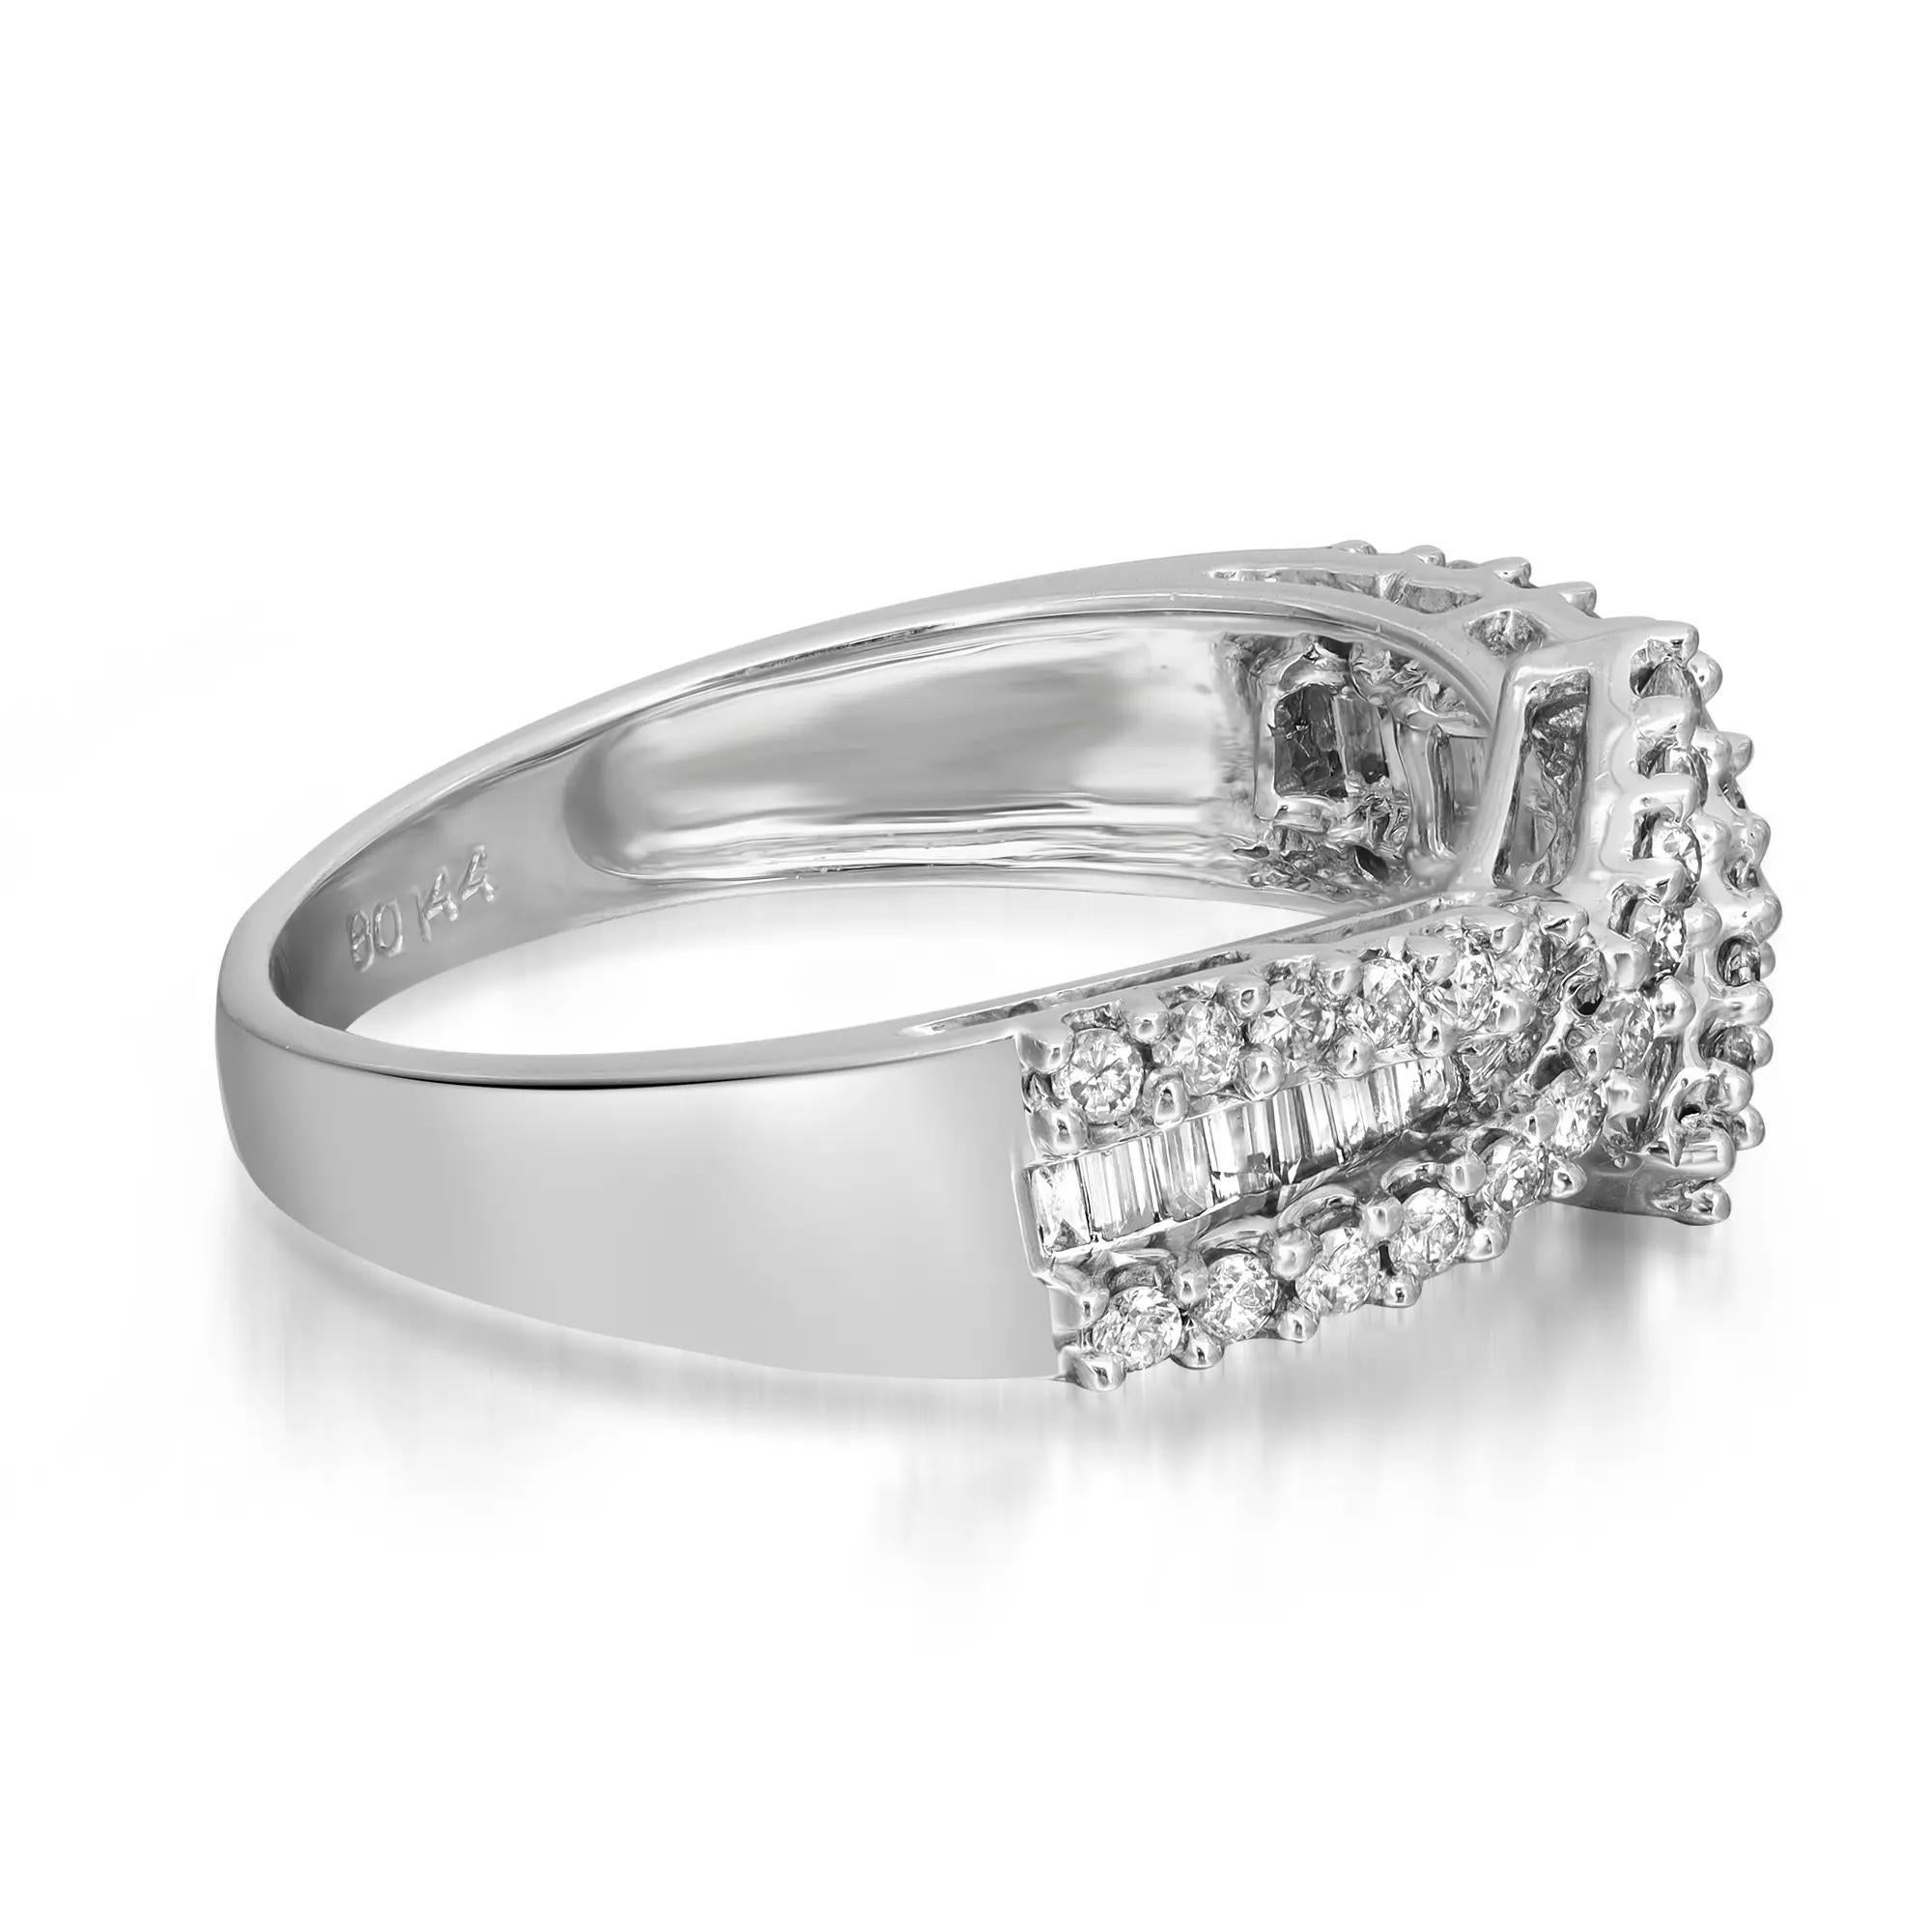 Modern 0.30Cttw Baguette & 0.35Cttw Round Diamond Ladies Ring 14K White Gold Size 7.75 For Sale